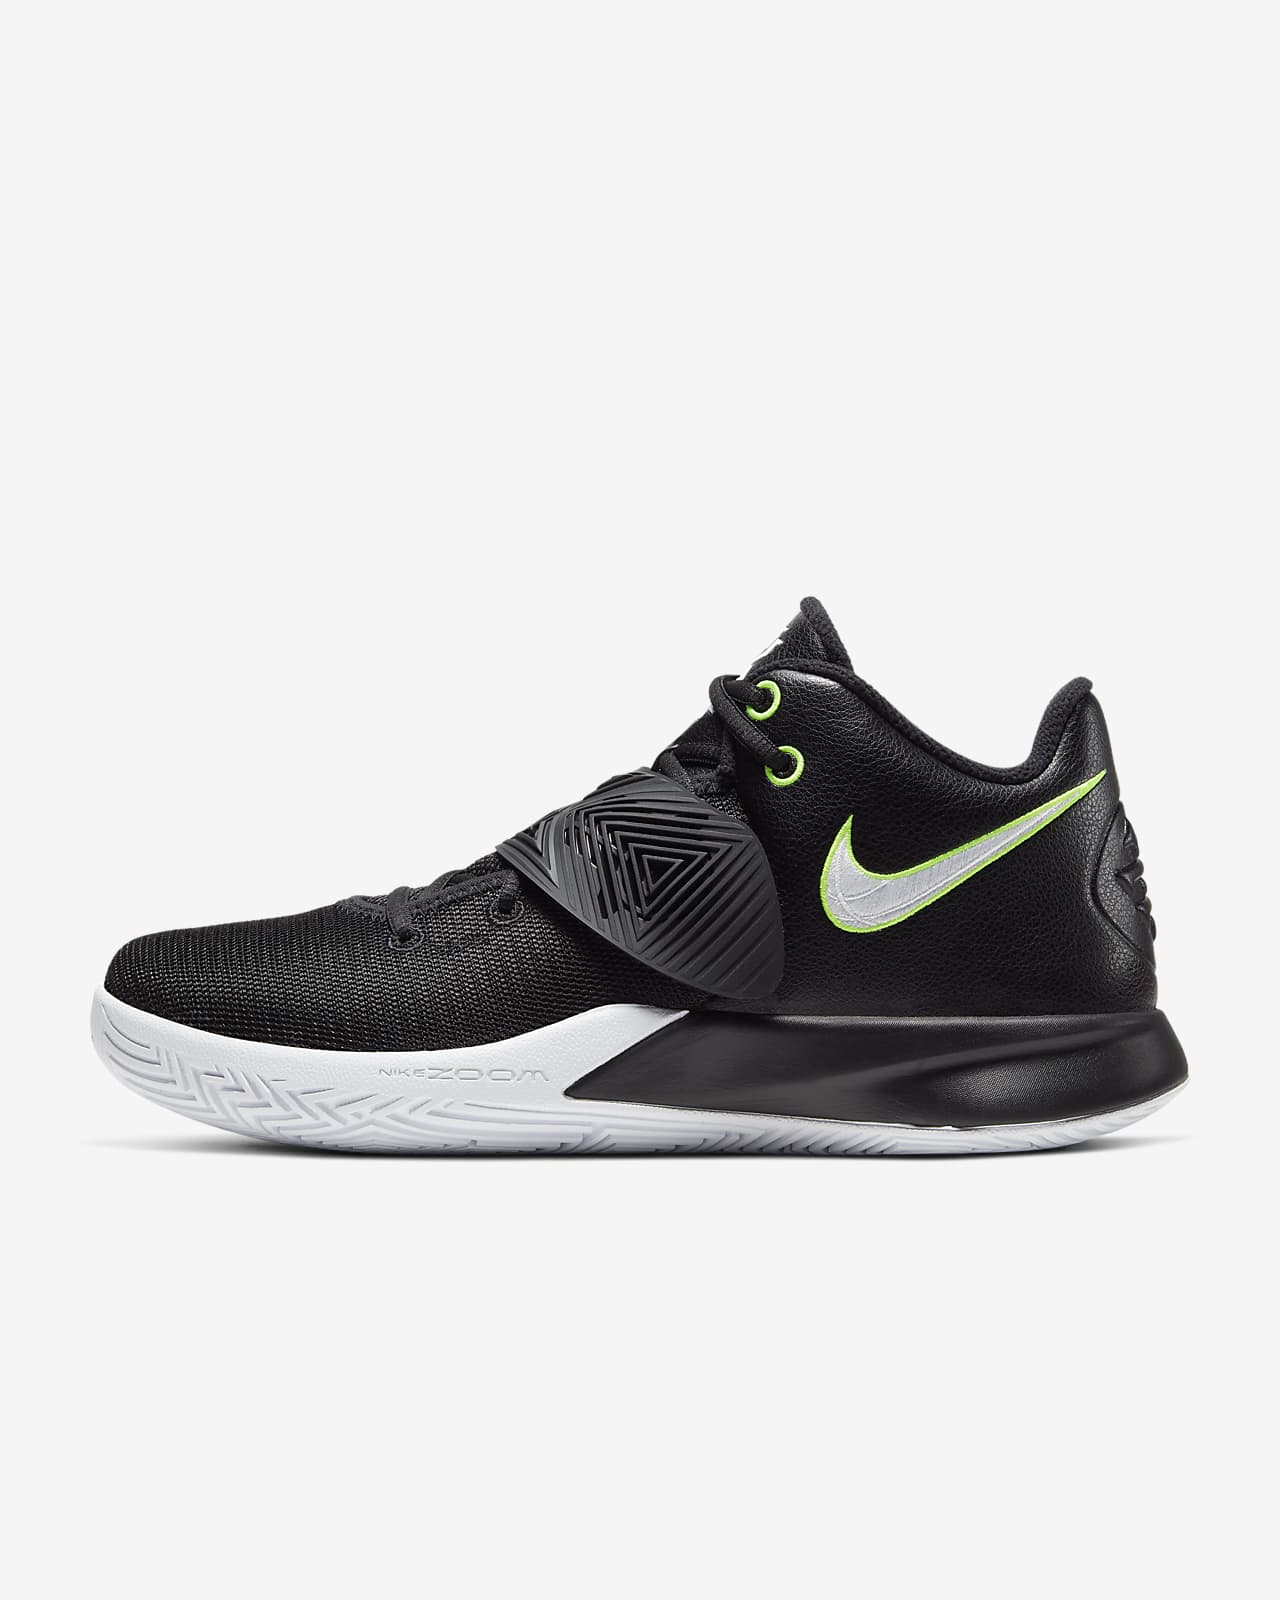 kyrie irving 3 flip the switch